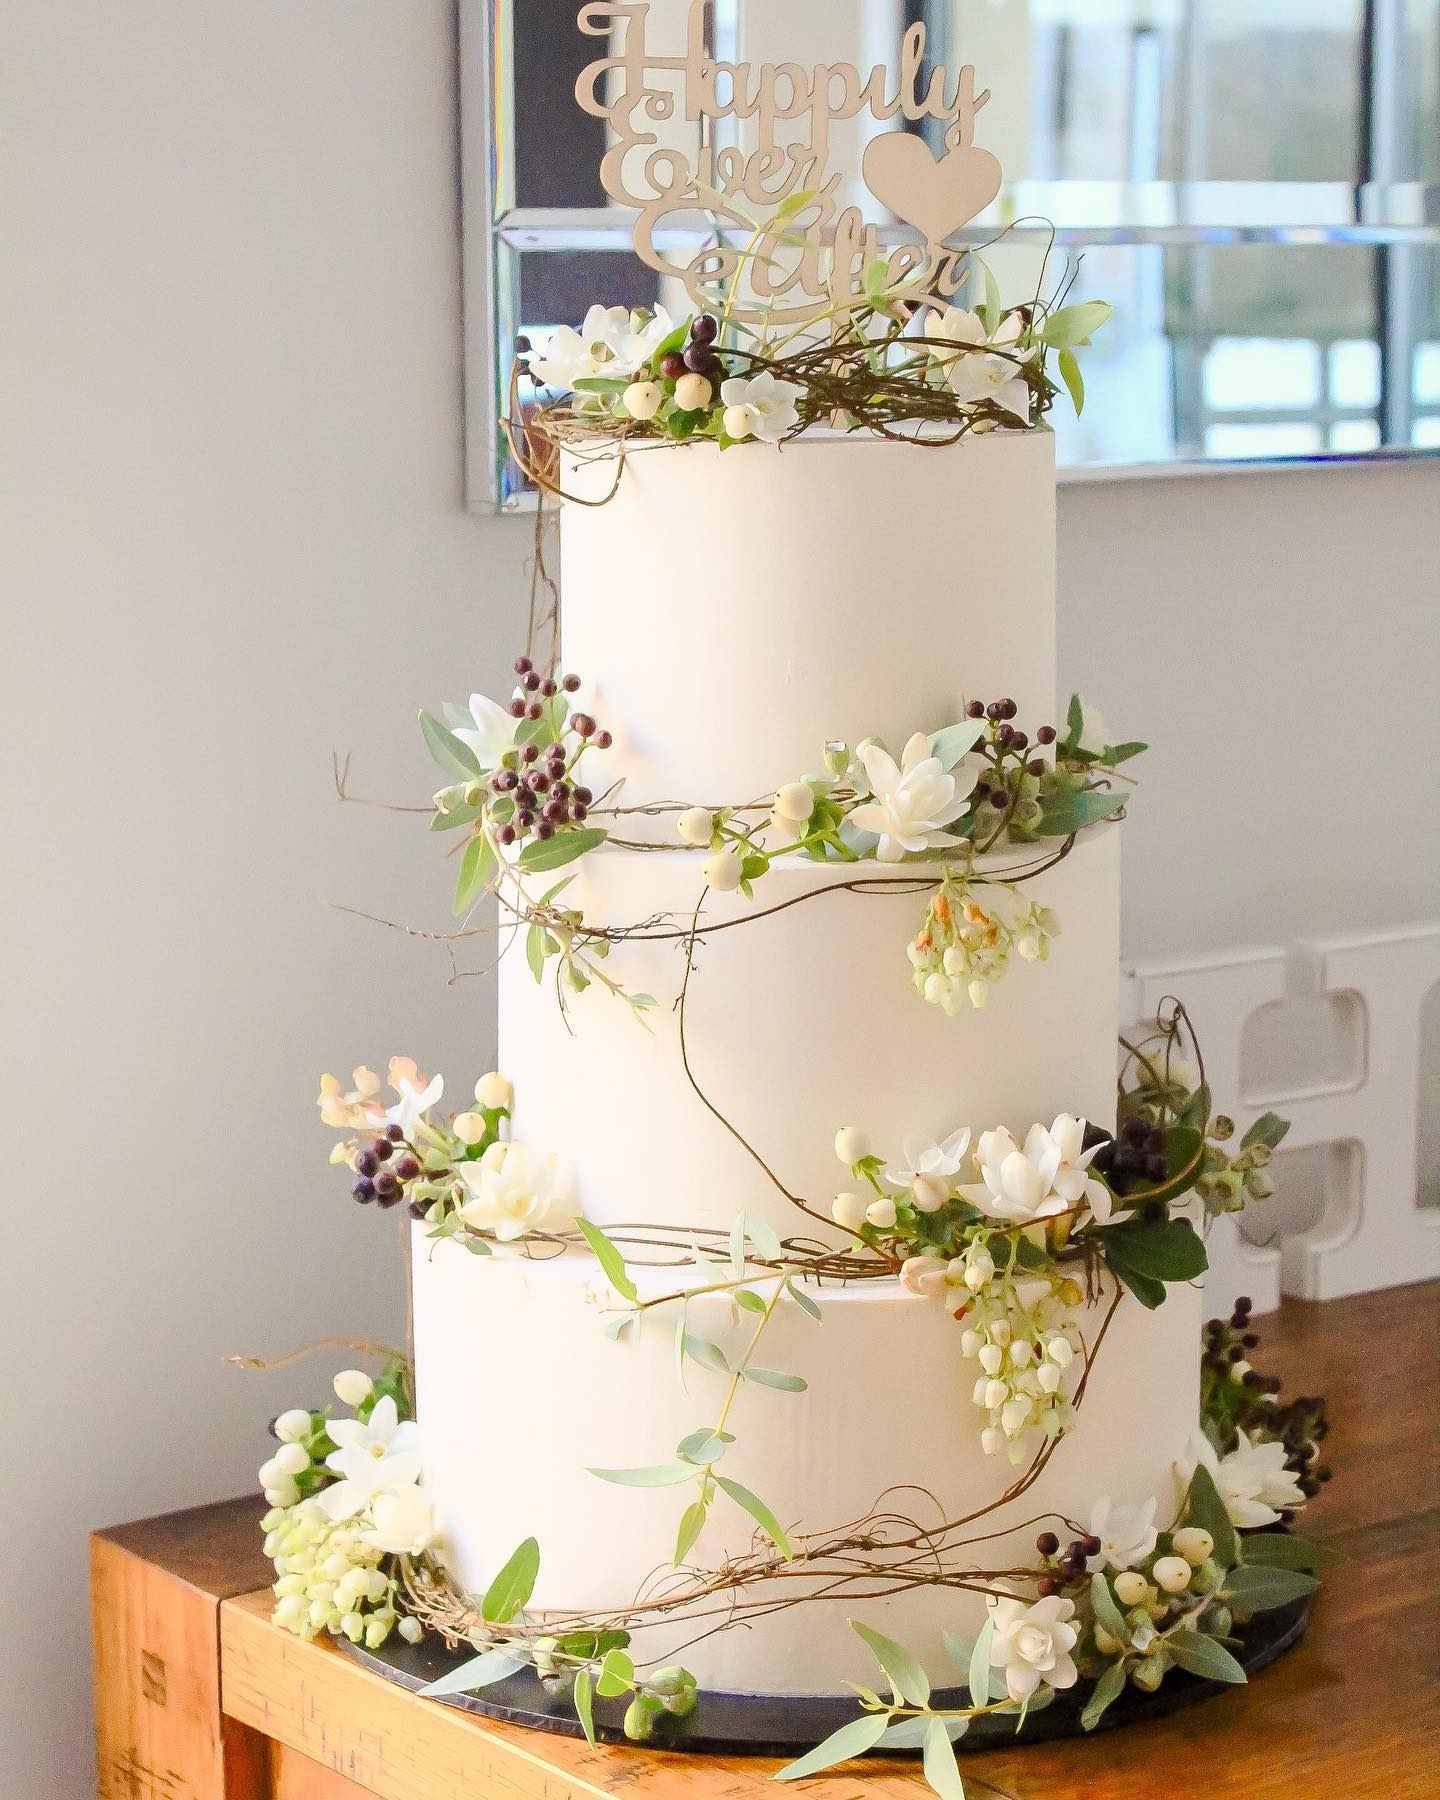 95+ Whimsical Winter Wedding Cakes to Love